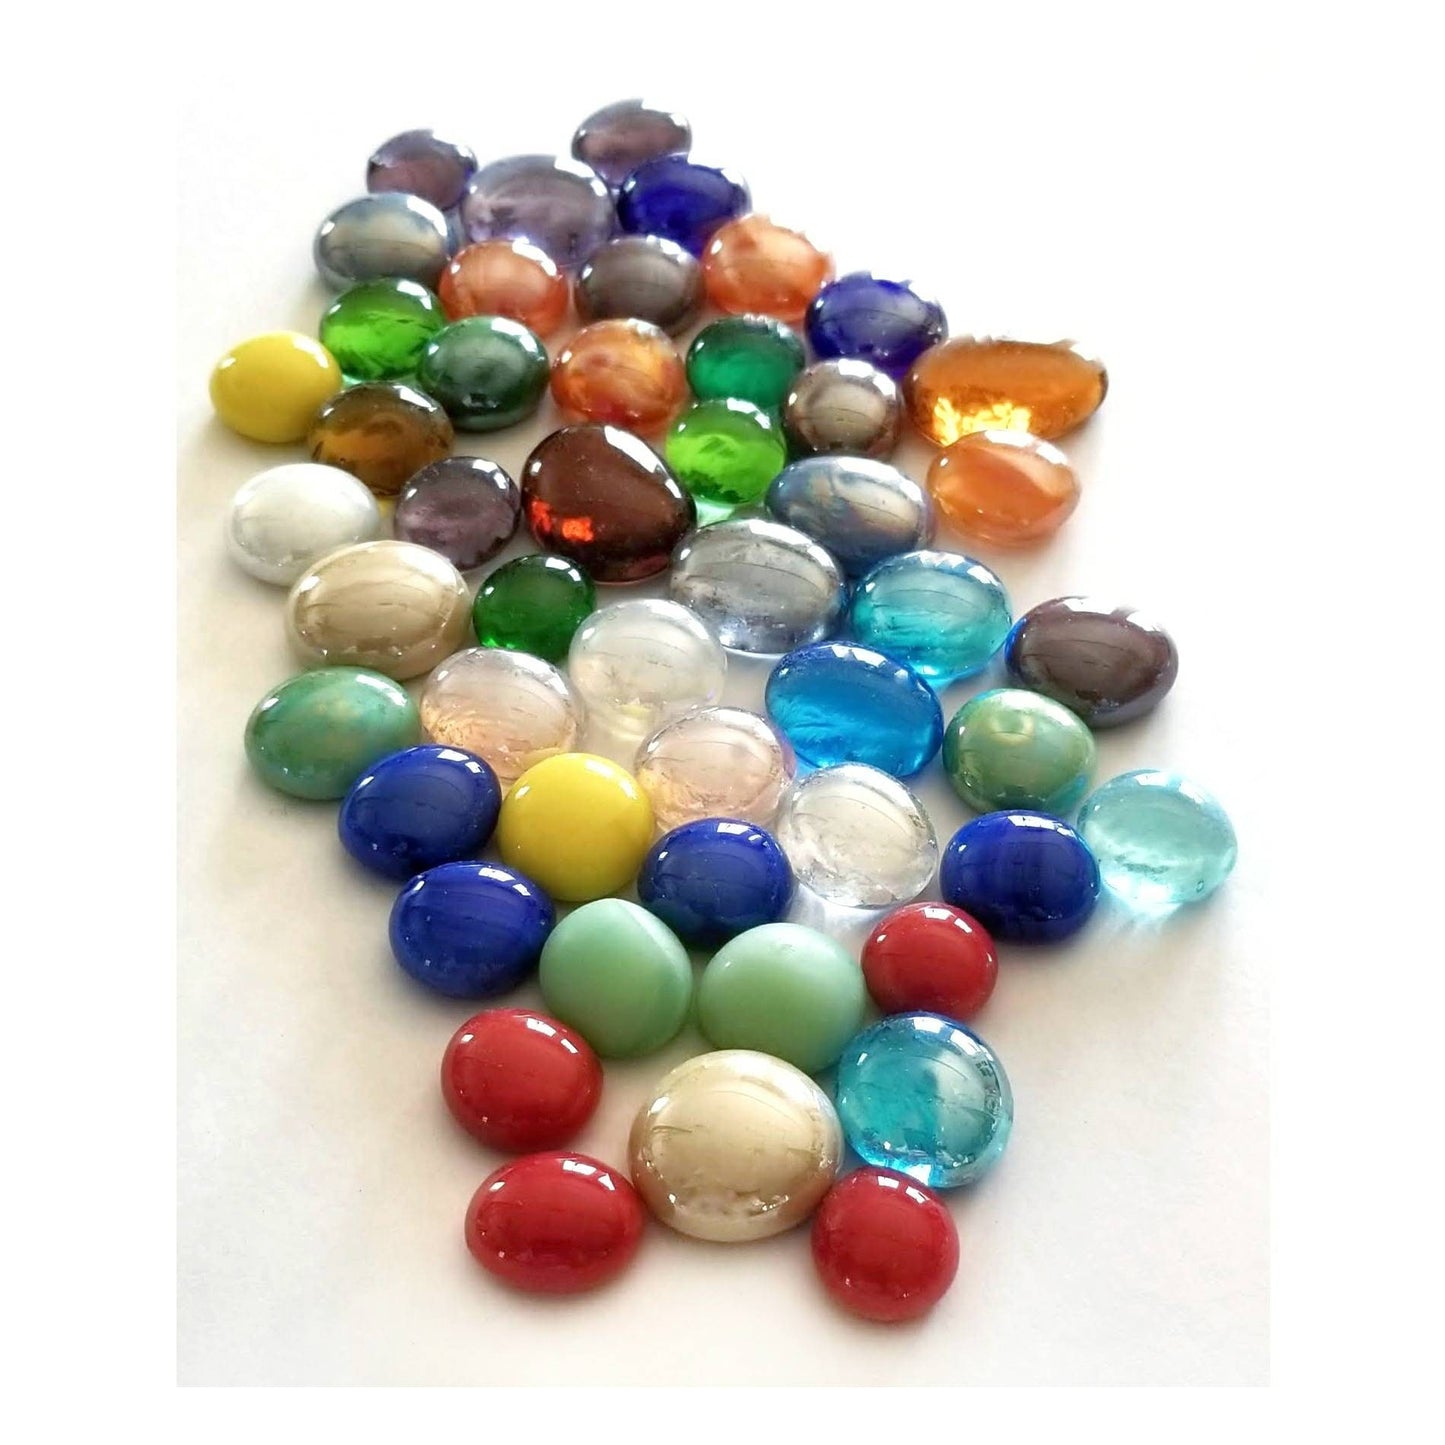 Glass Gems for Stained Glass/Jewelry Making Supply/Kids Teen Craft Projects. Assorted Colors, Iridescents. Average Size Medium